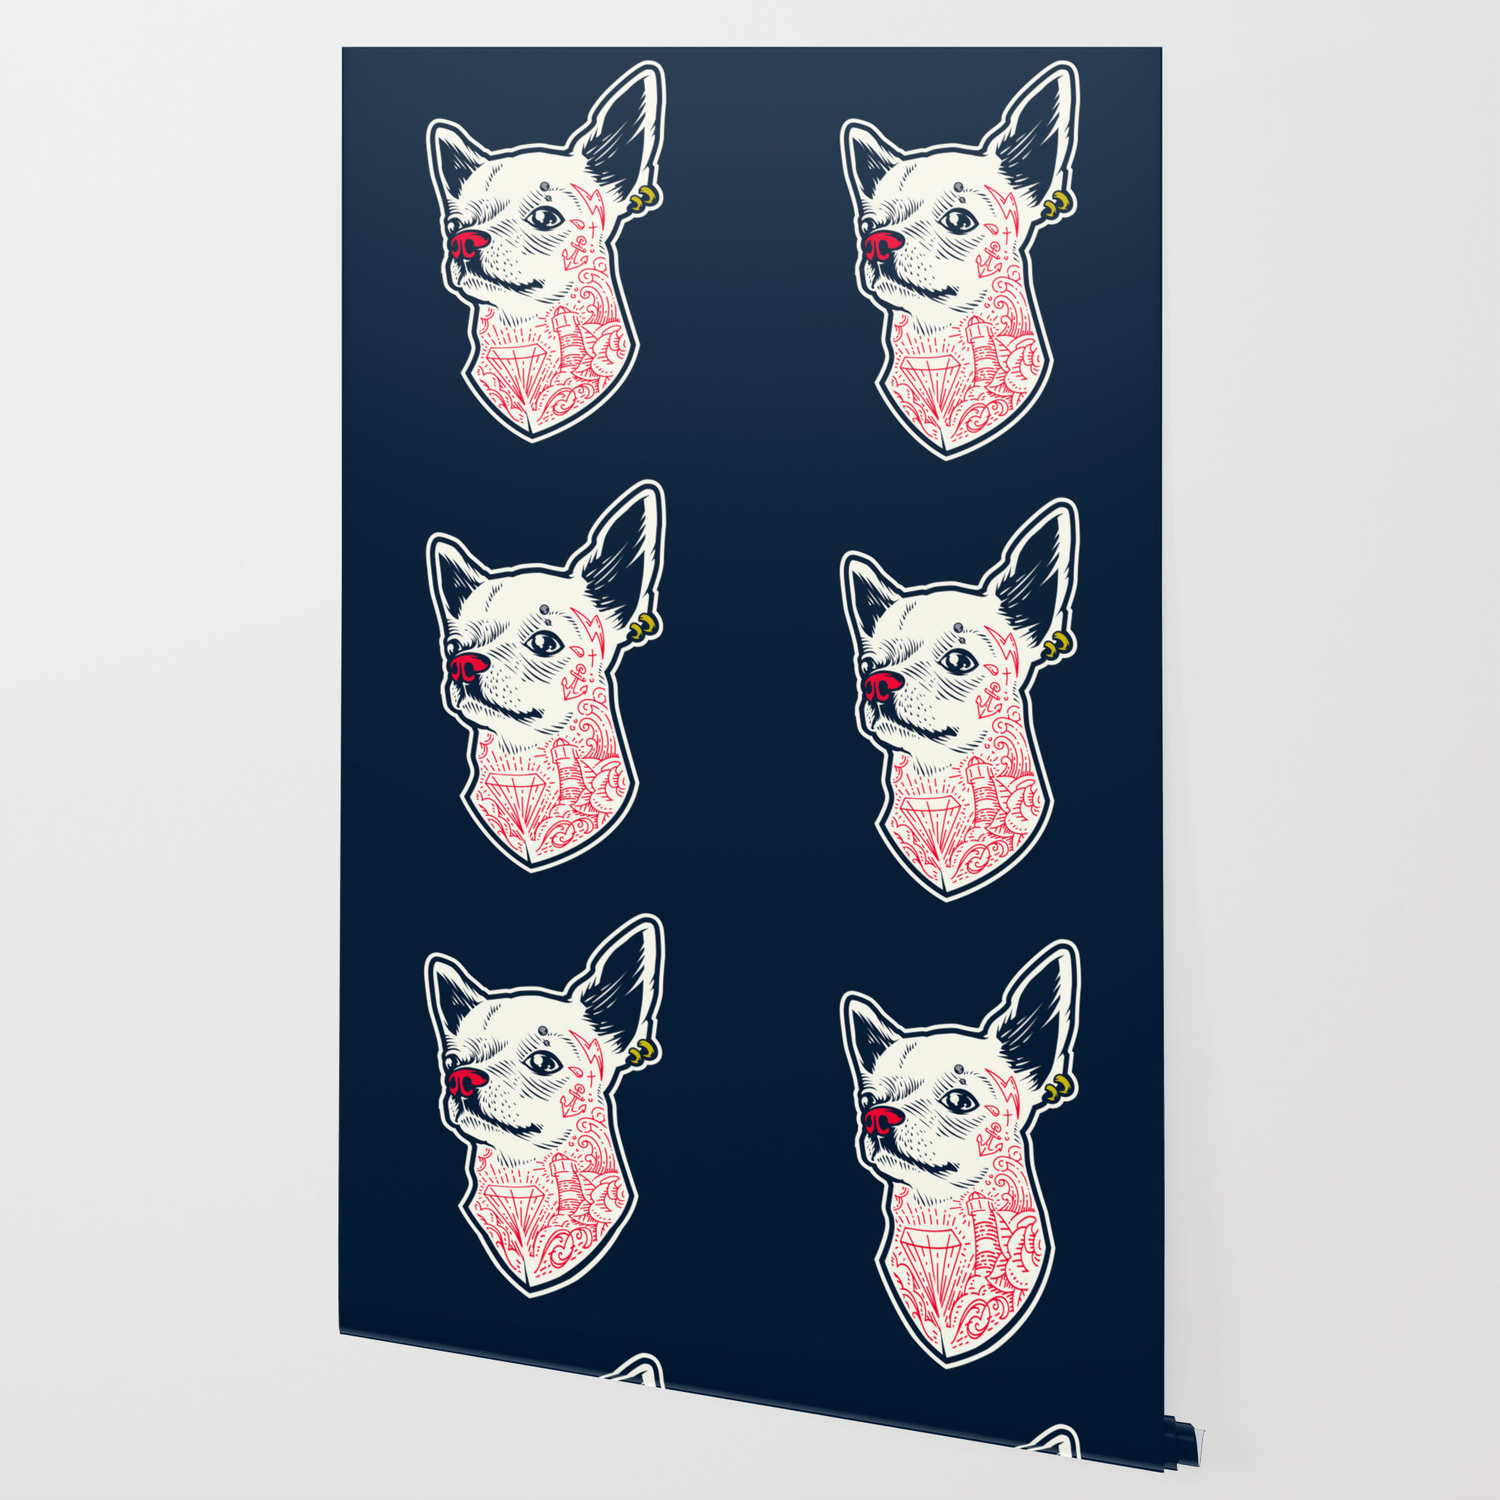 Funny Hipster Style Good Boy Dog Lover Tattoo Covered Chihuahua Wallpaper  by machmigo | Society6